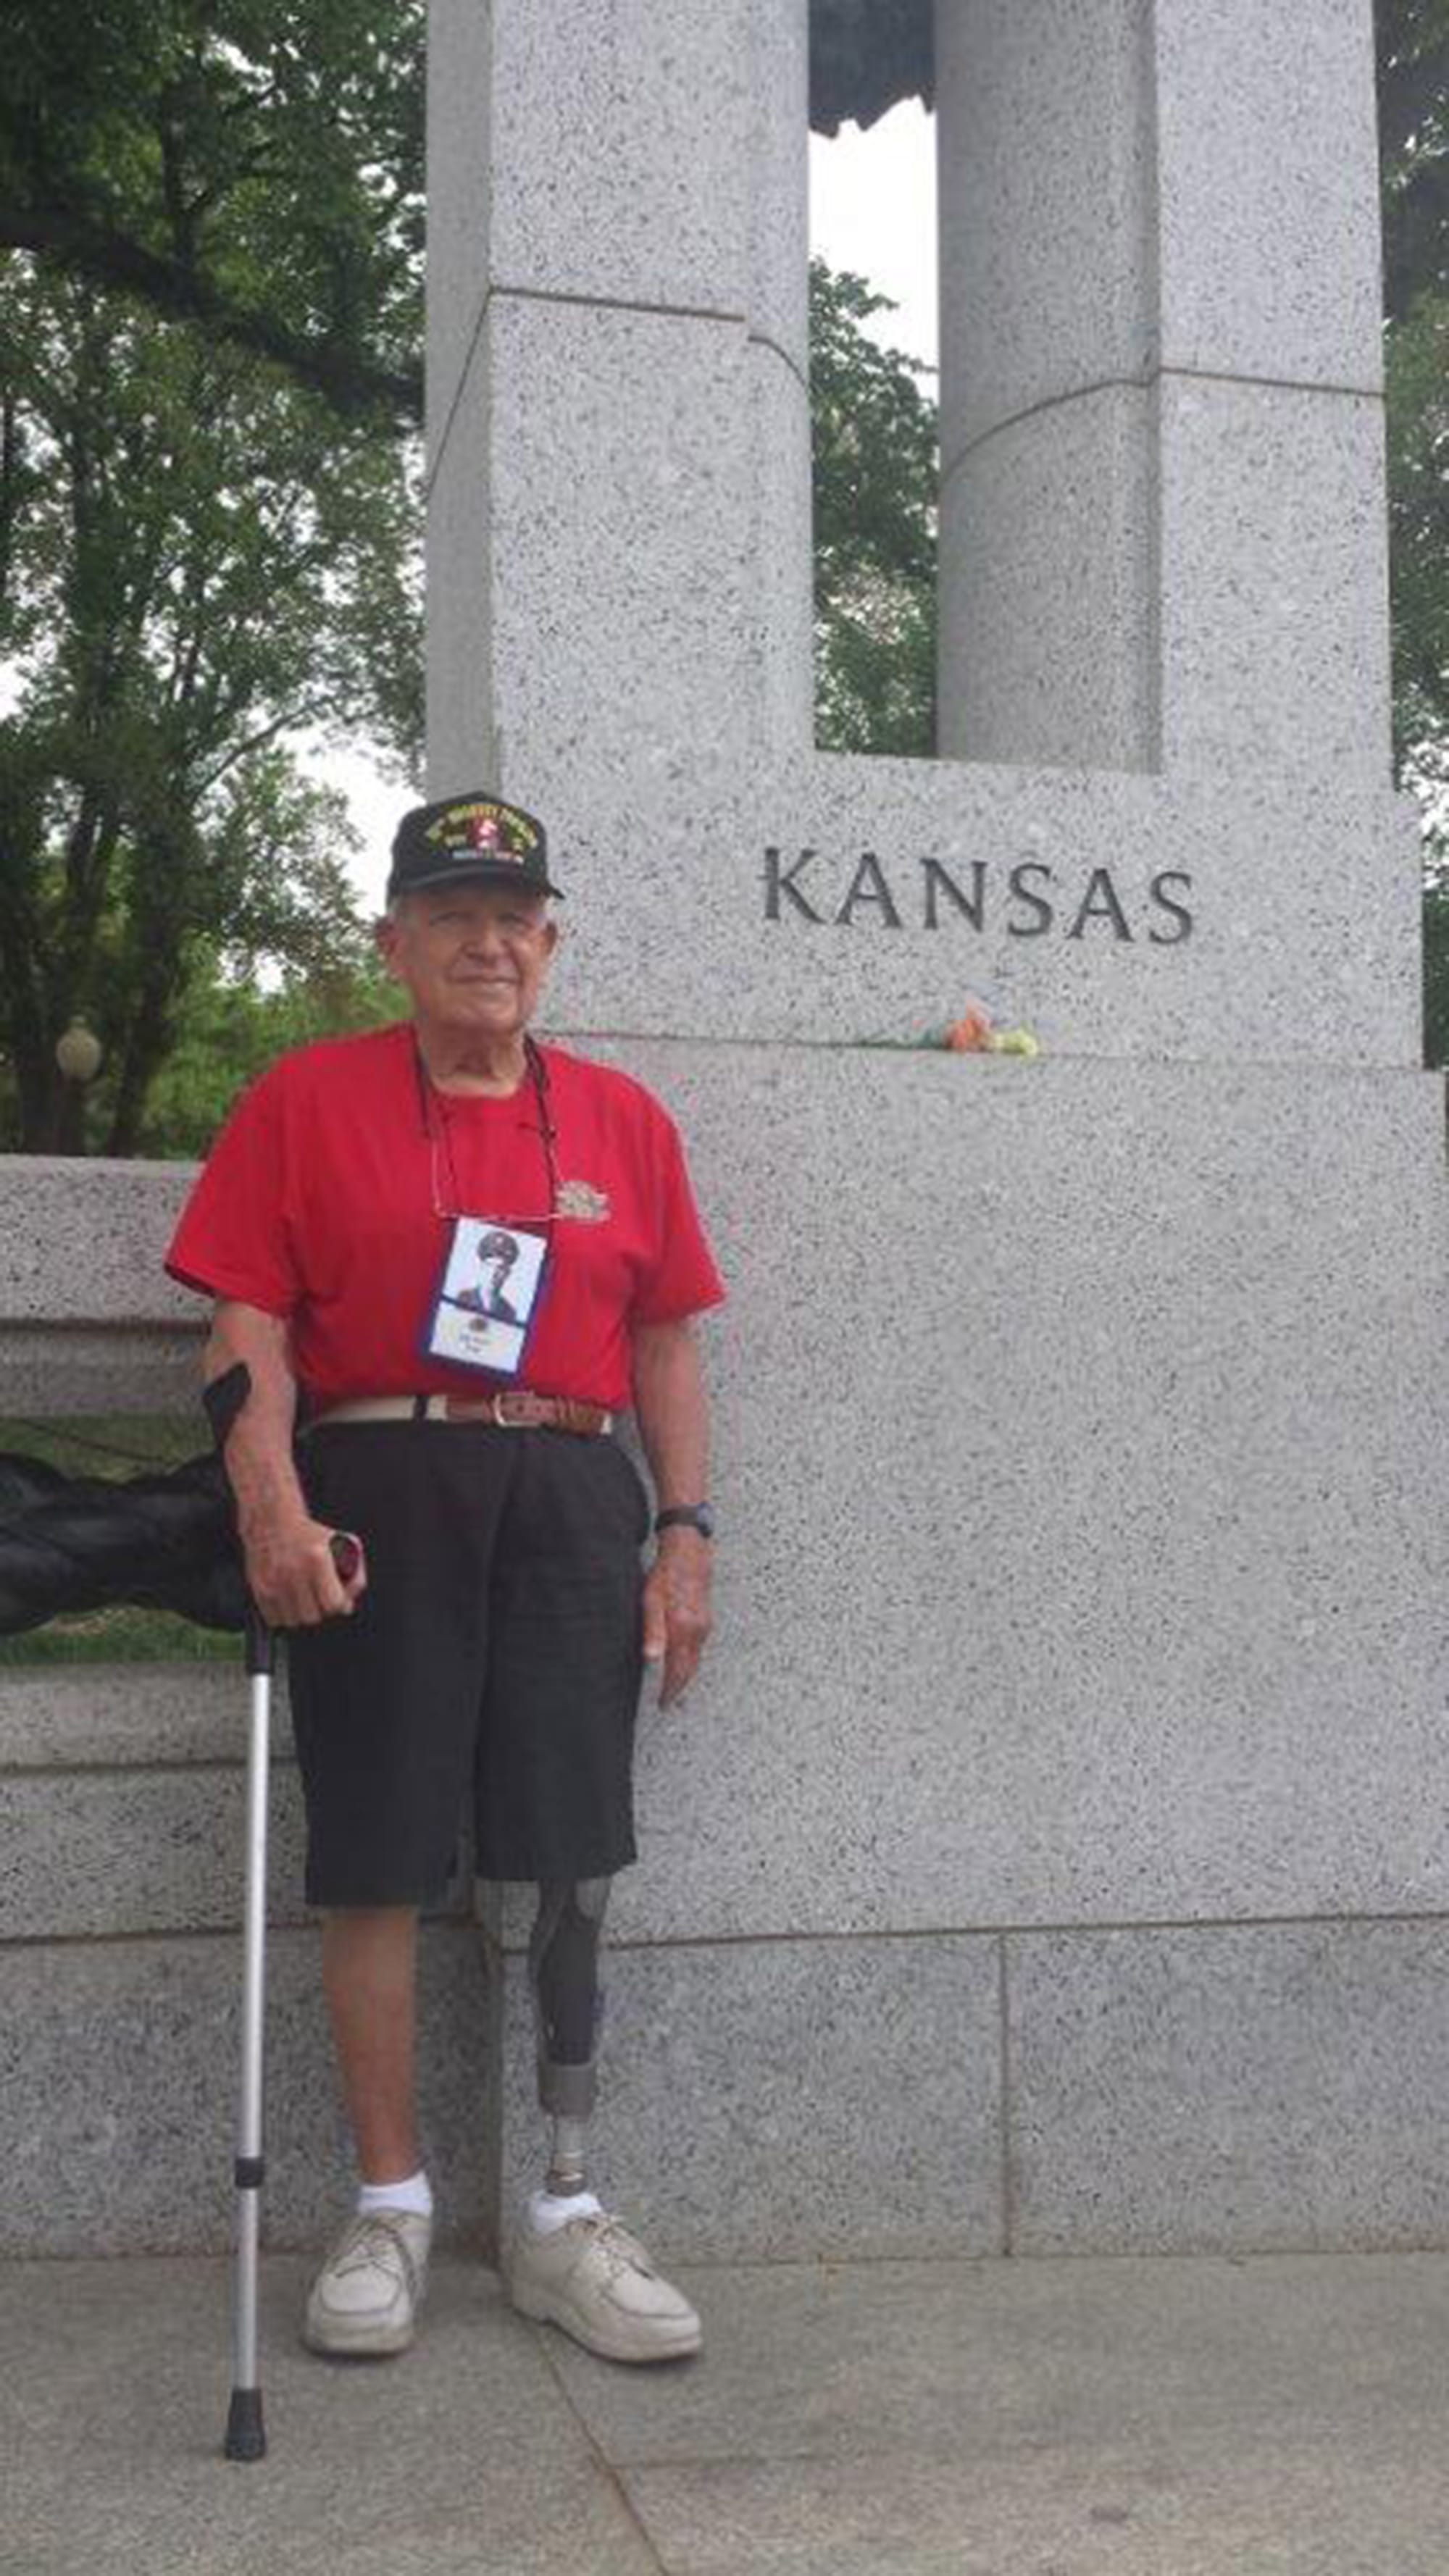 World War II veteran and former POW Dale Bowlin stands with his home state&#039;s column in the National World War II Memorial in Washington, D.C.